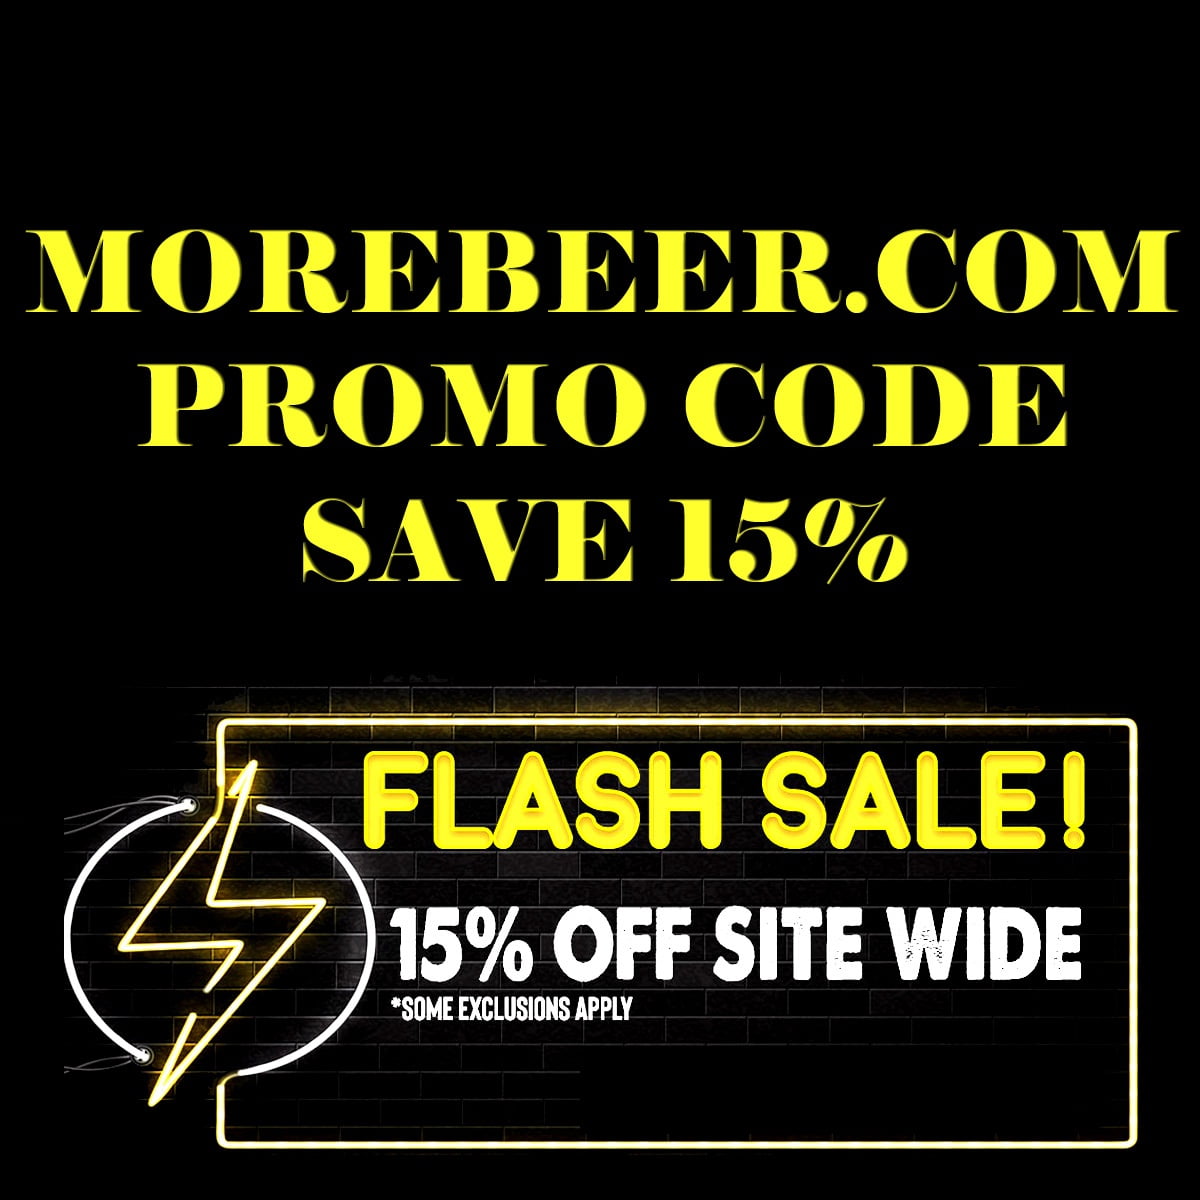 MoreBeer.com Flash Sale, Save an Additional 15% With This Promo Code